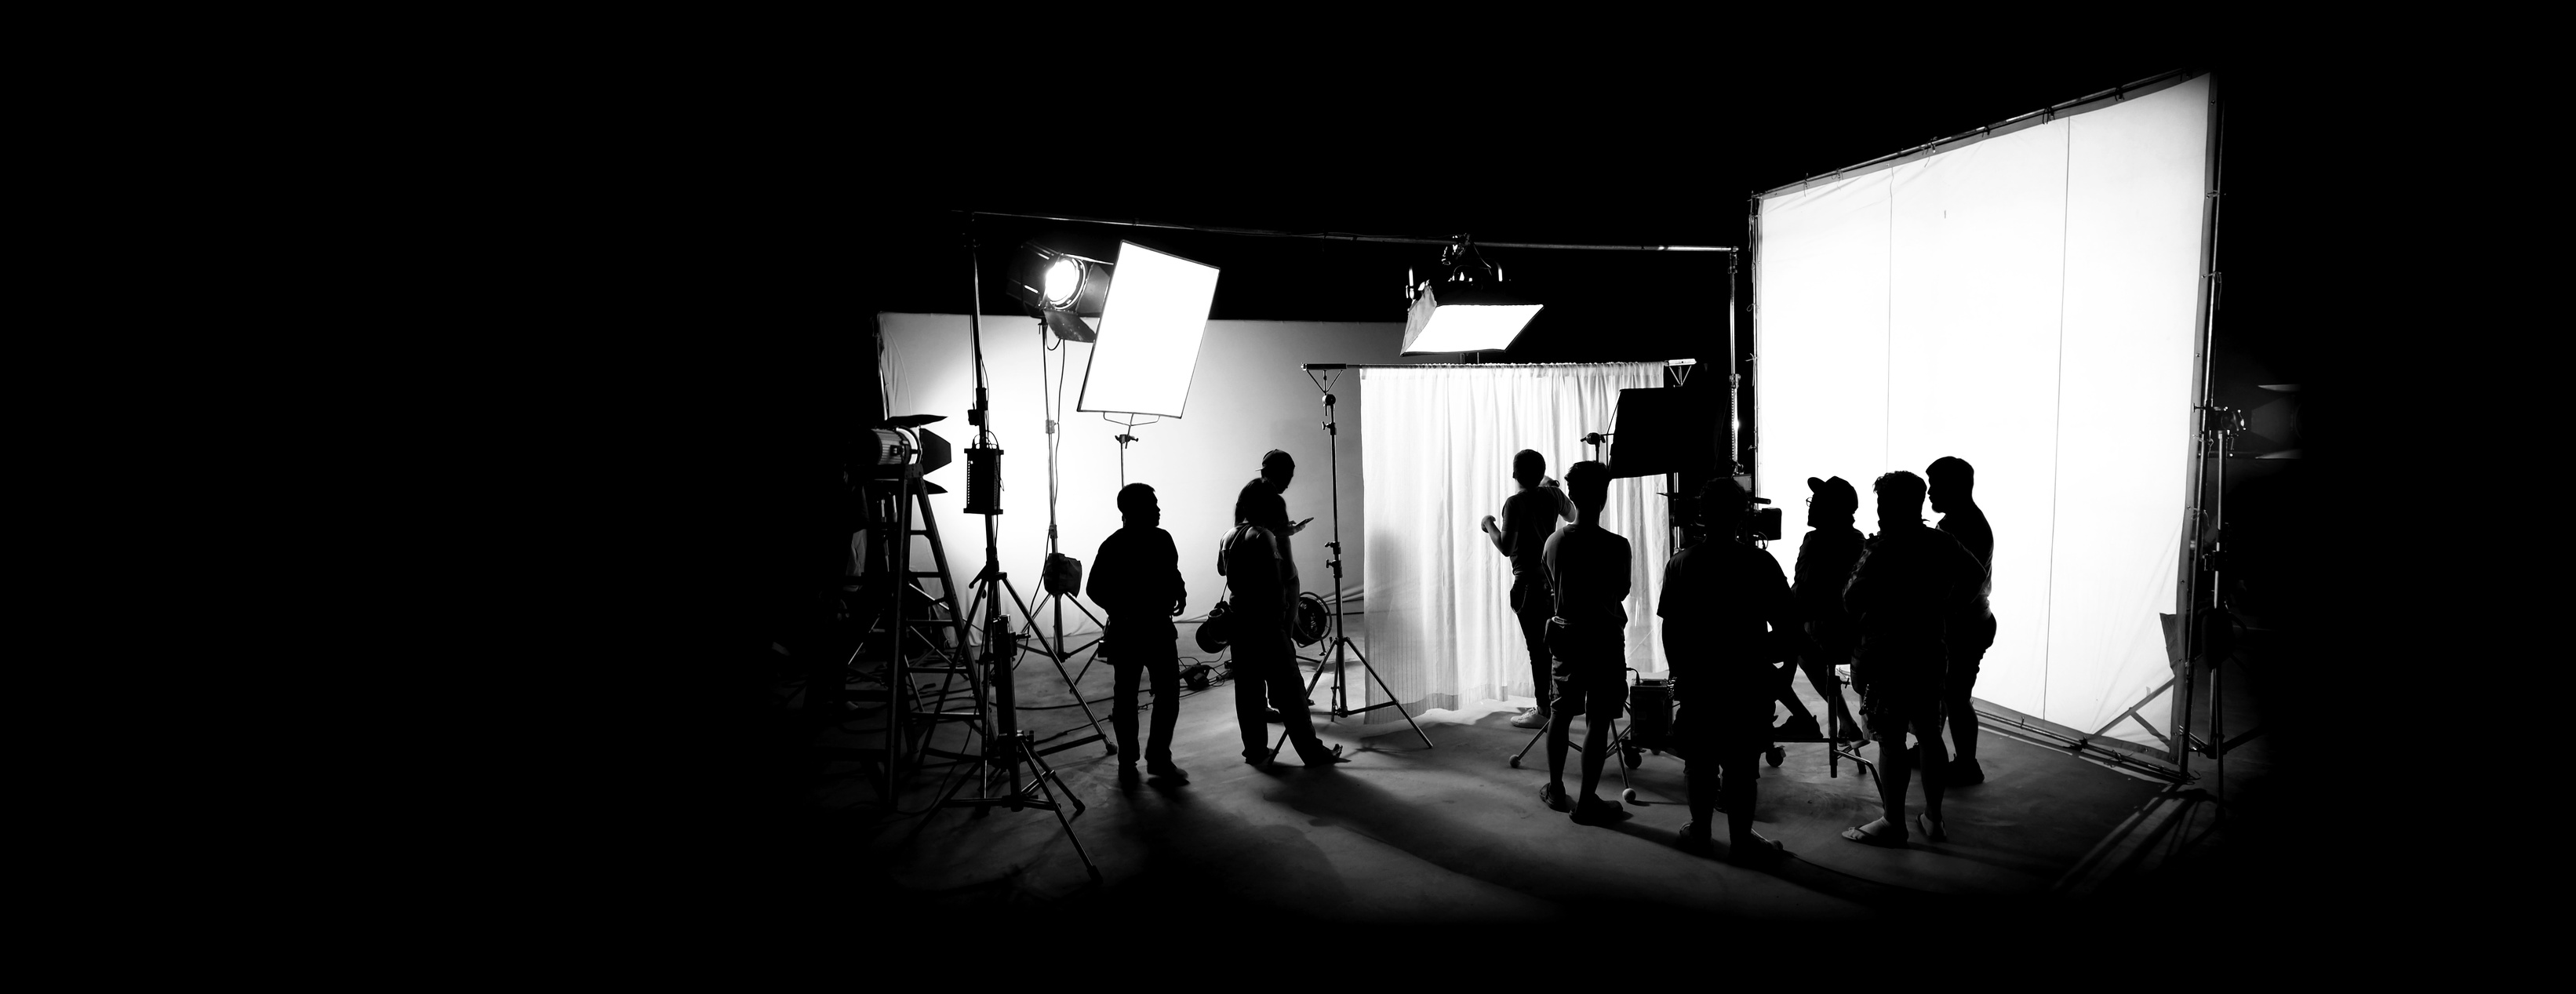 Silhouette Images of Film Production. behind the Scenes